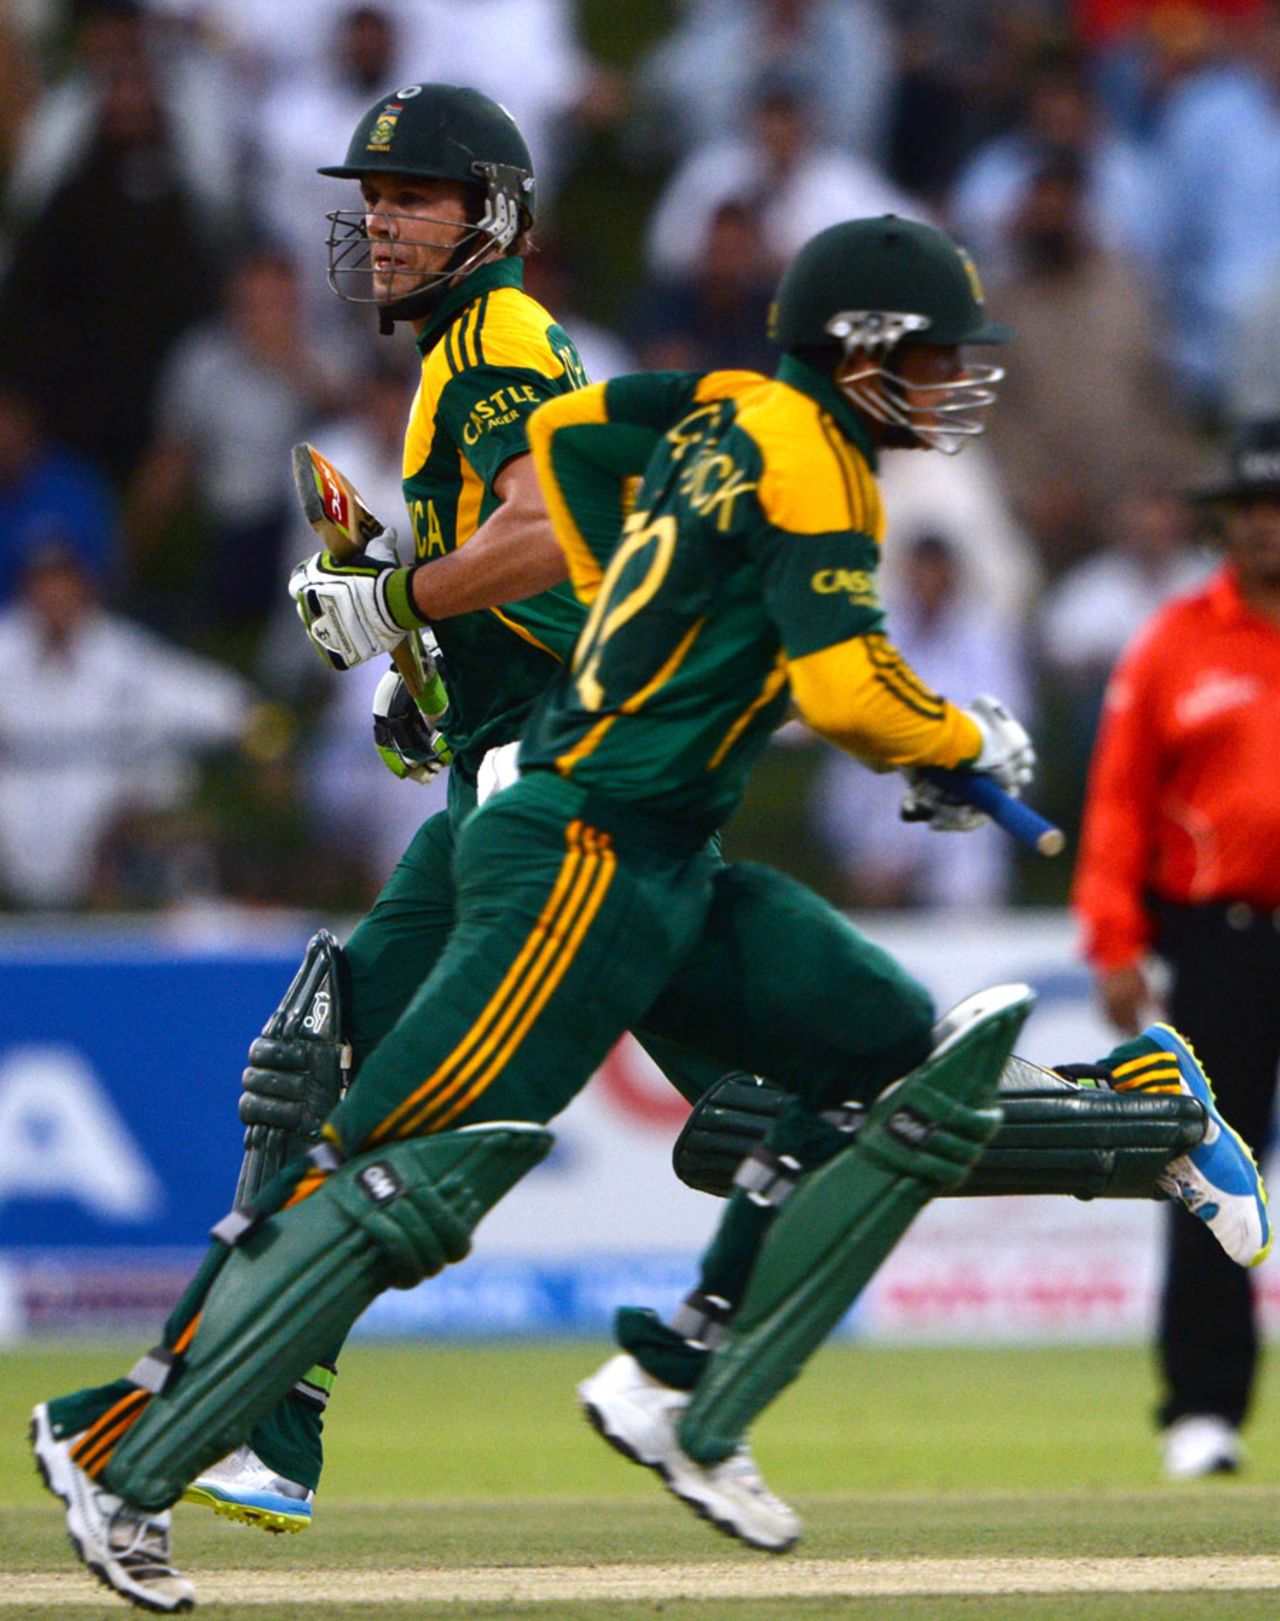 Quinton de Kock and AB de Villiers added 69 for the third wicket, Pakistan v South Africa, 4th ODI, Abu Dhabi, November 8, 2013